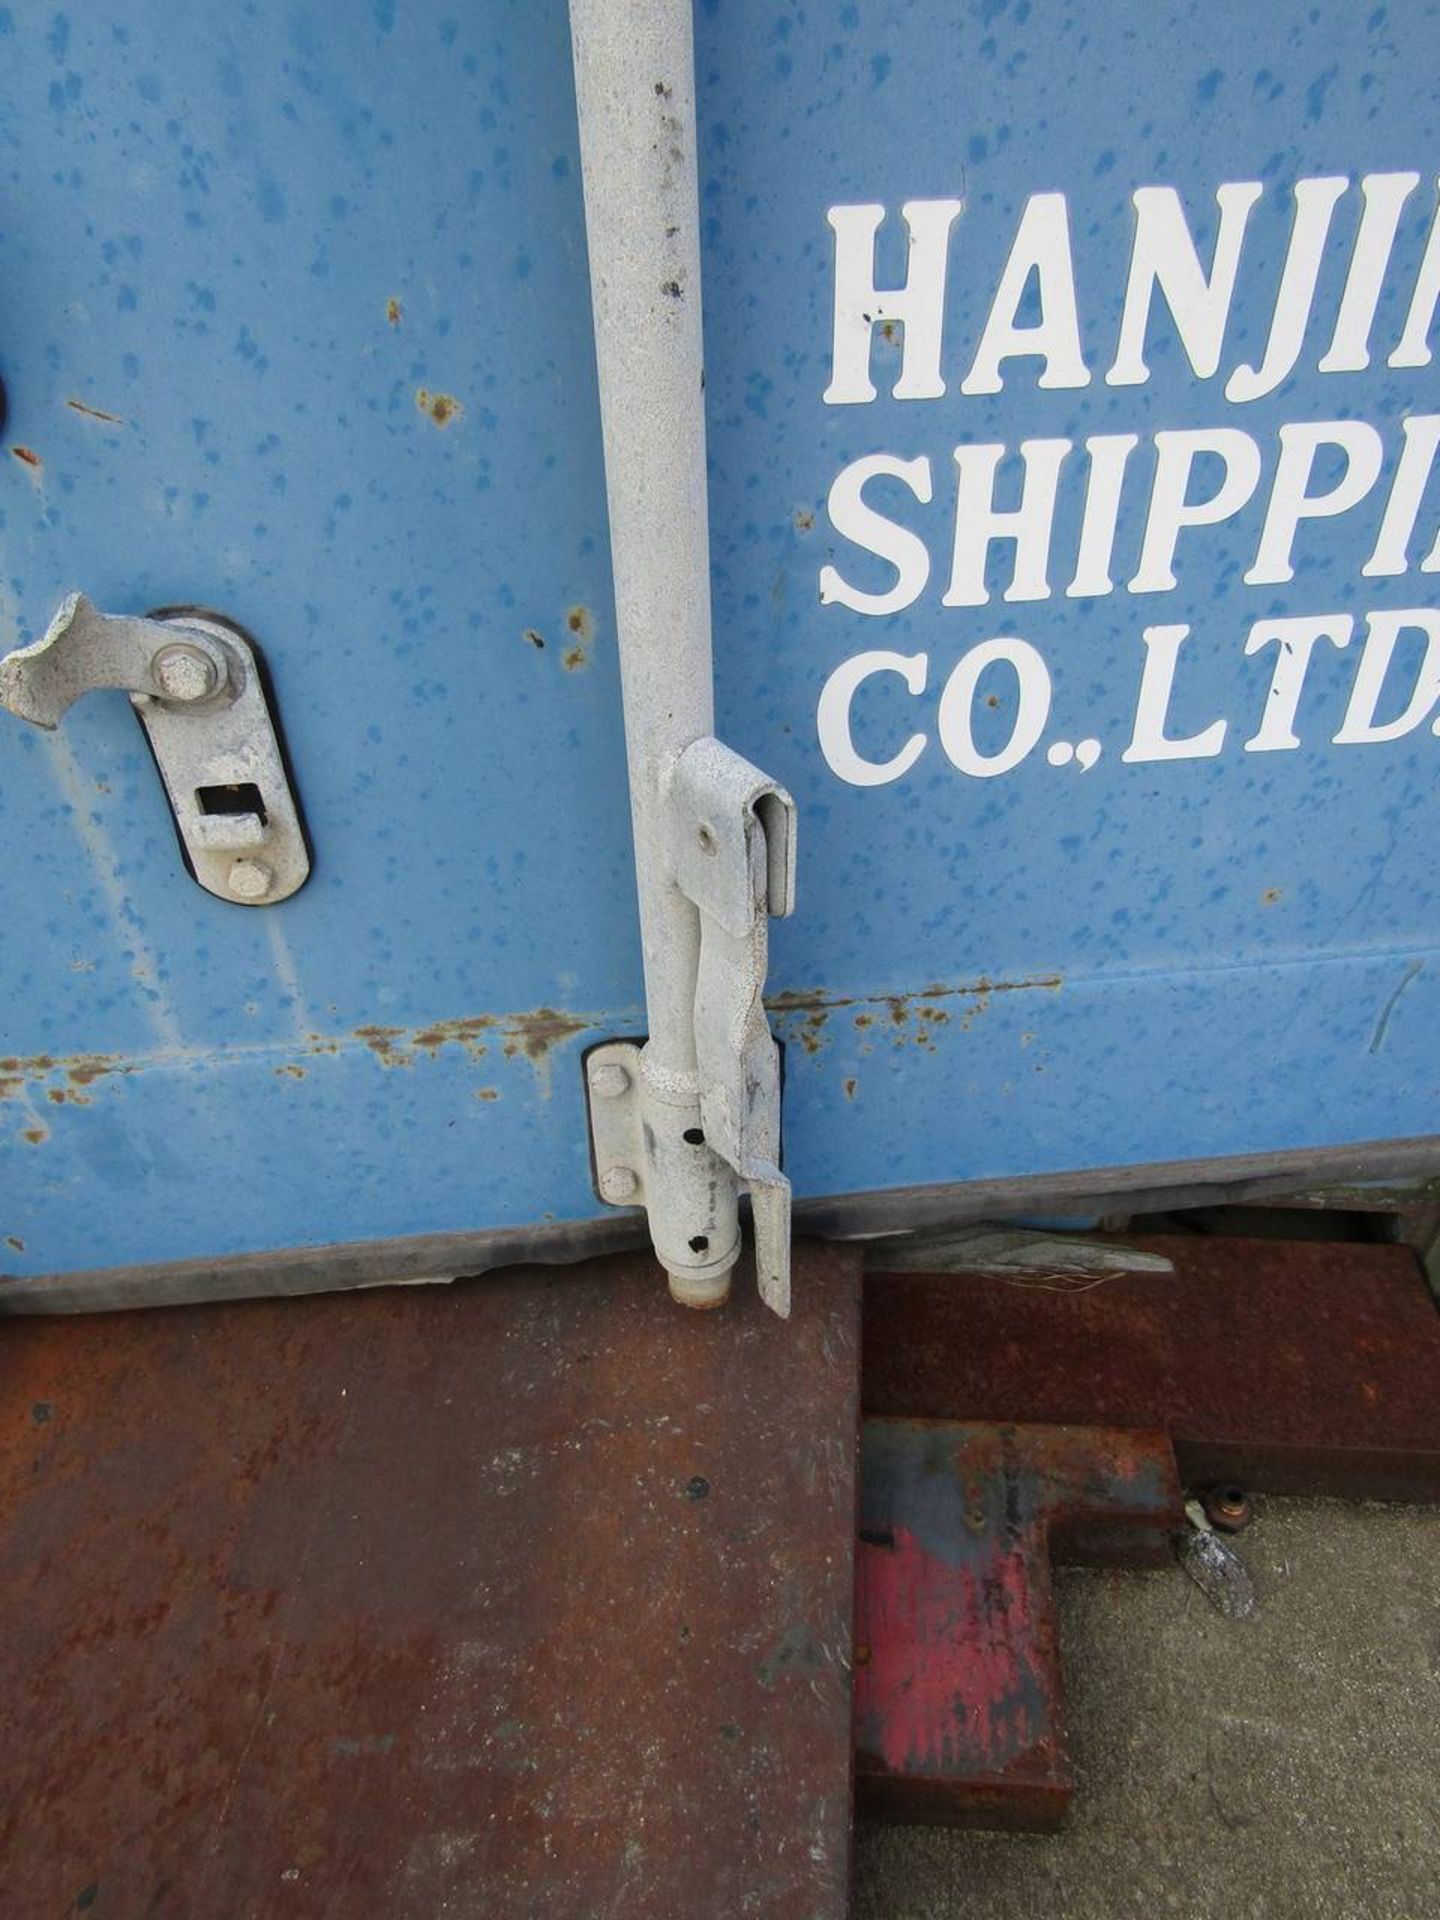 Hanjin CXIC1155 40' Shipping Container - Image 6 of 8